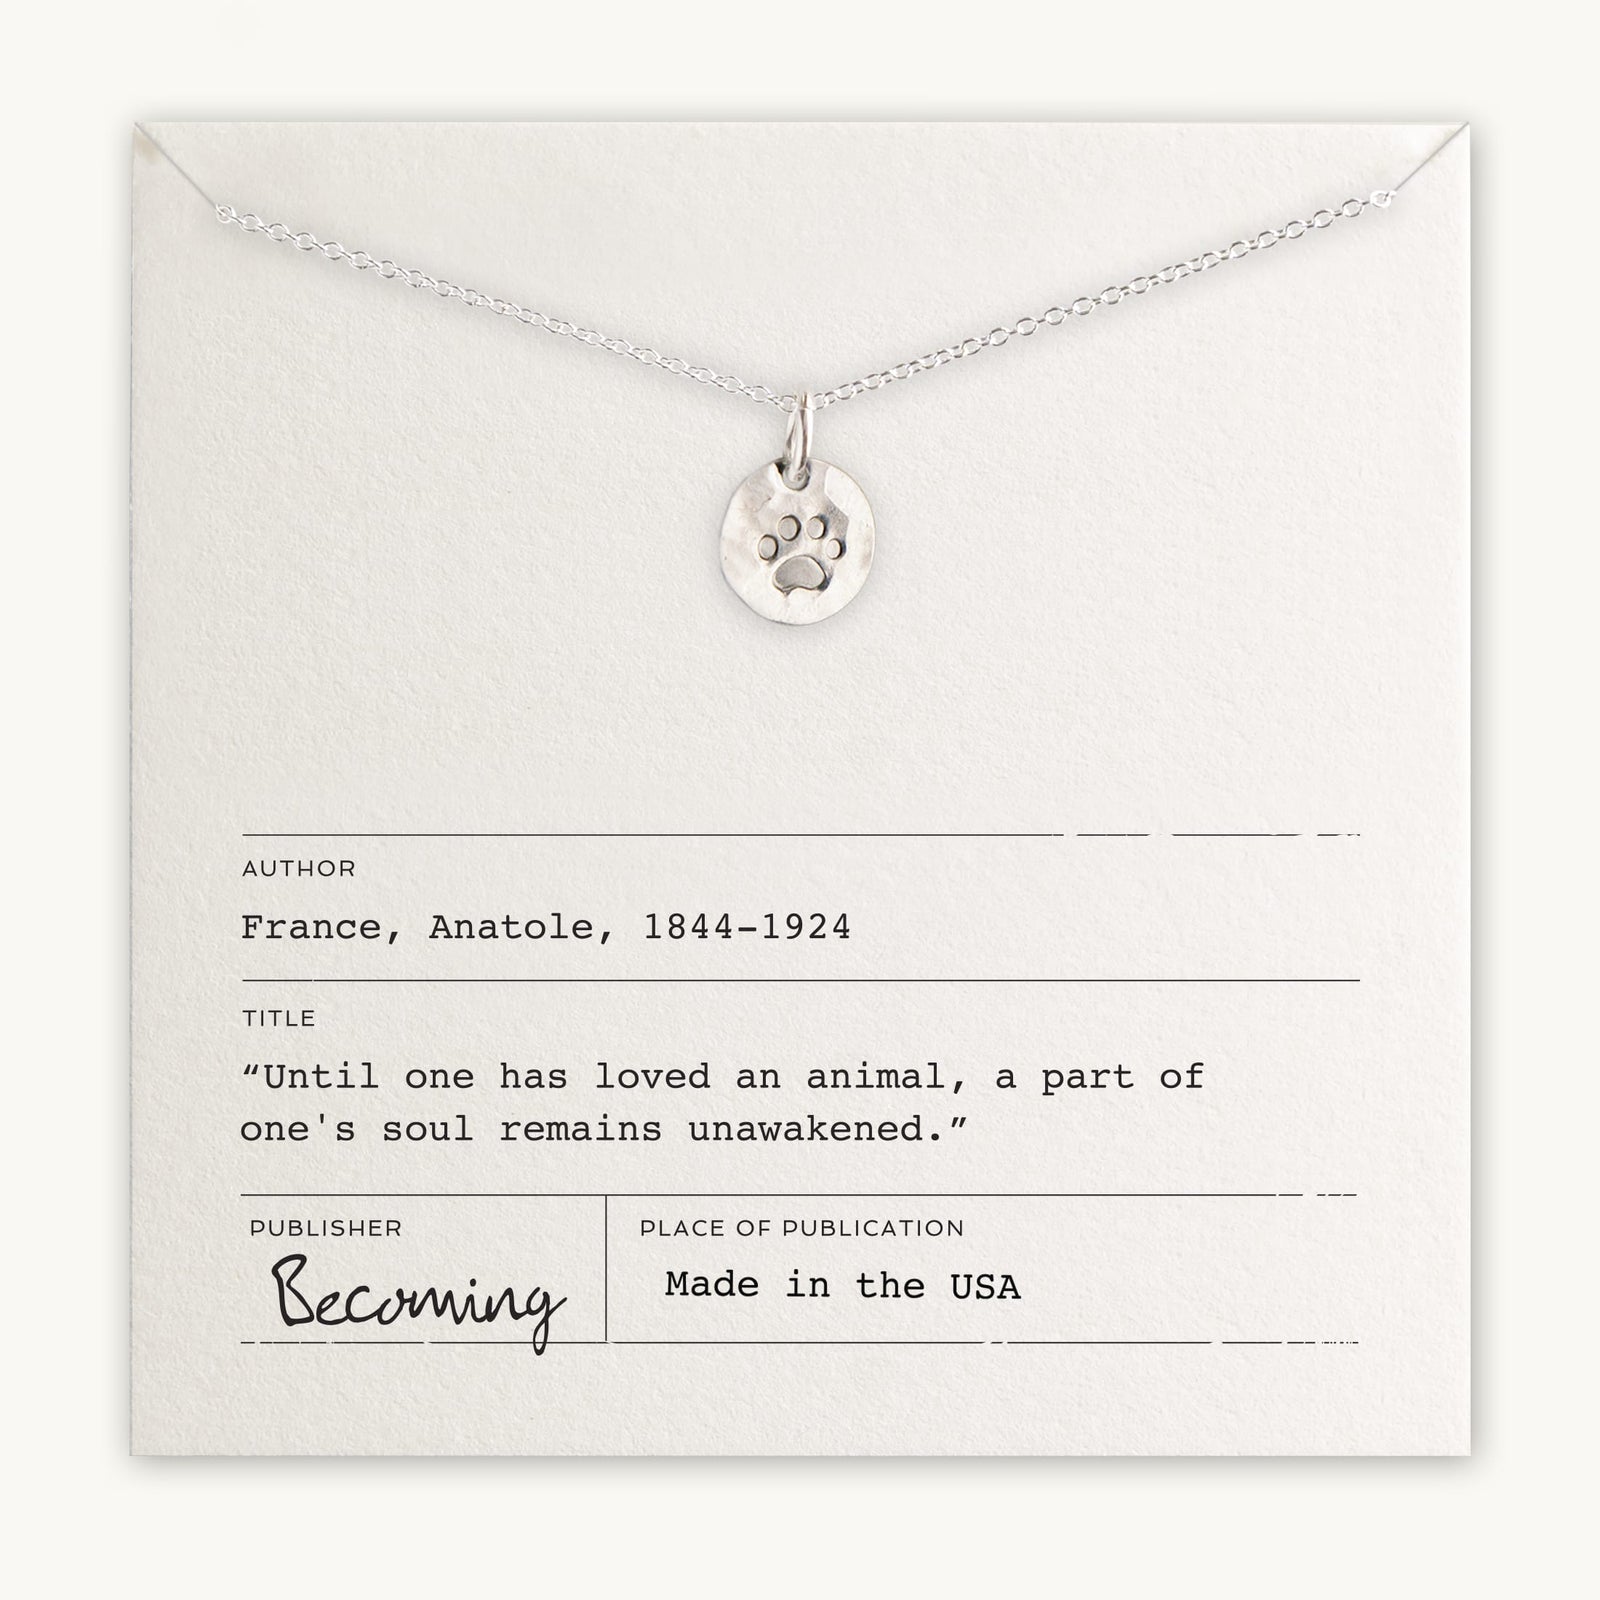 Becoming Jewelry's Paw Print Necklace with paw print charm pendant presented on a card with an Anatole France quote.